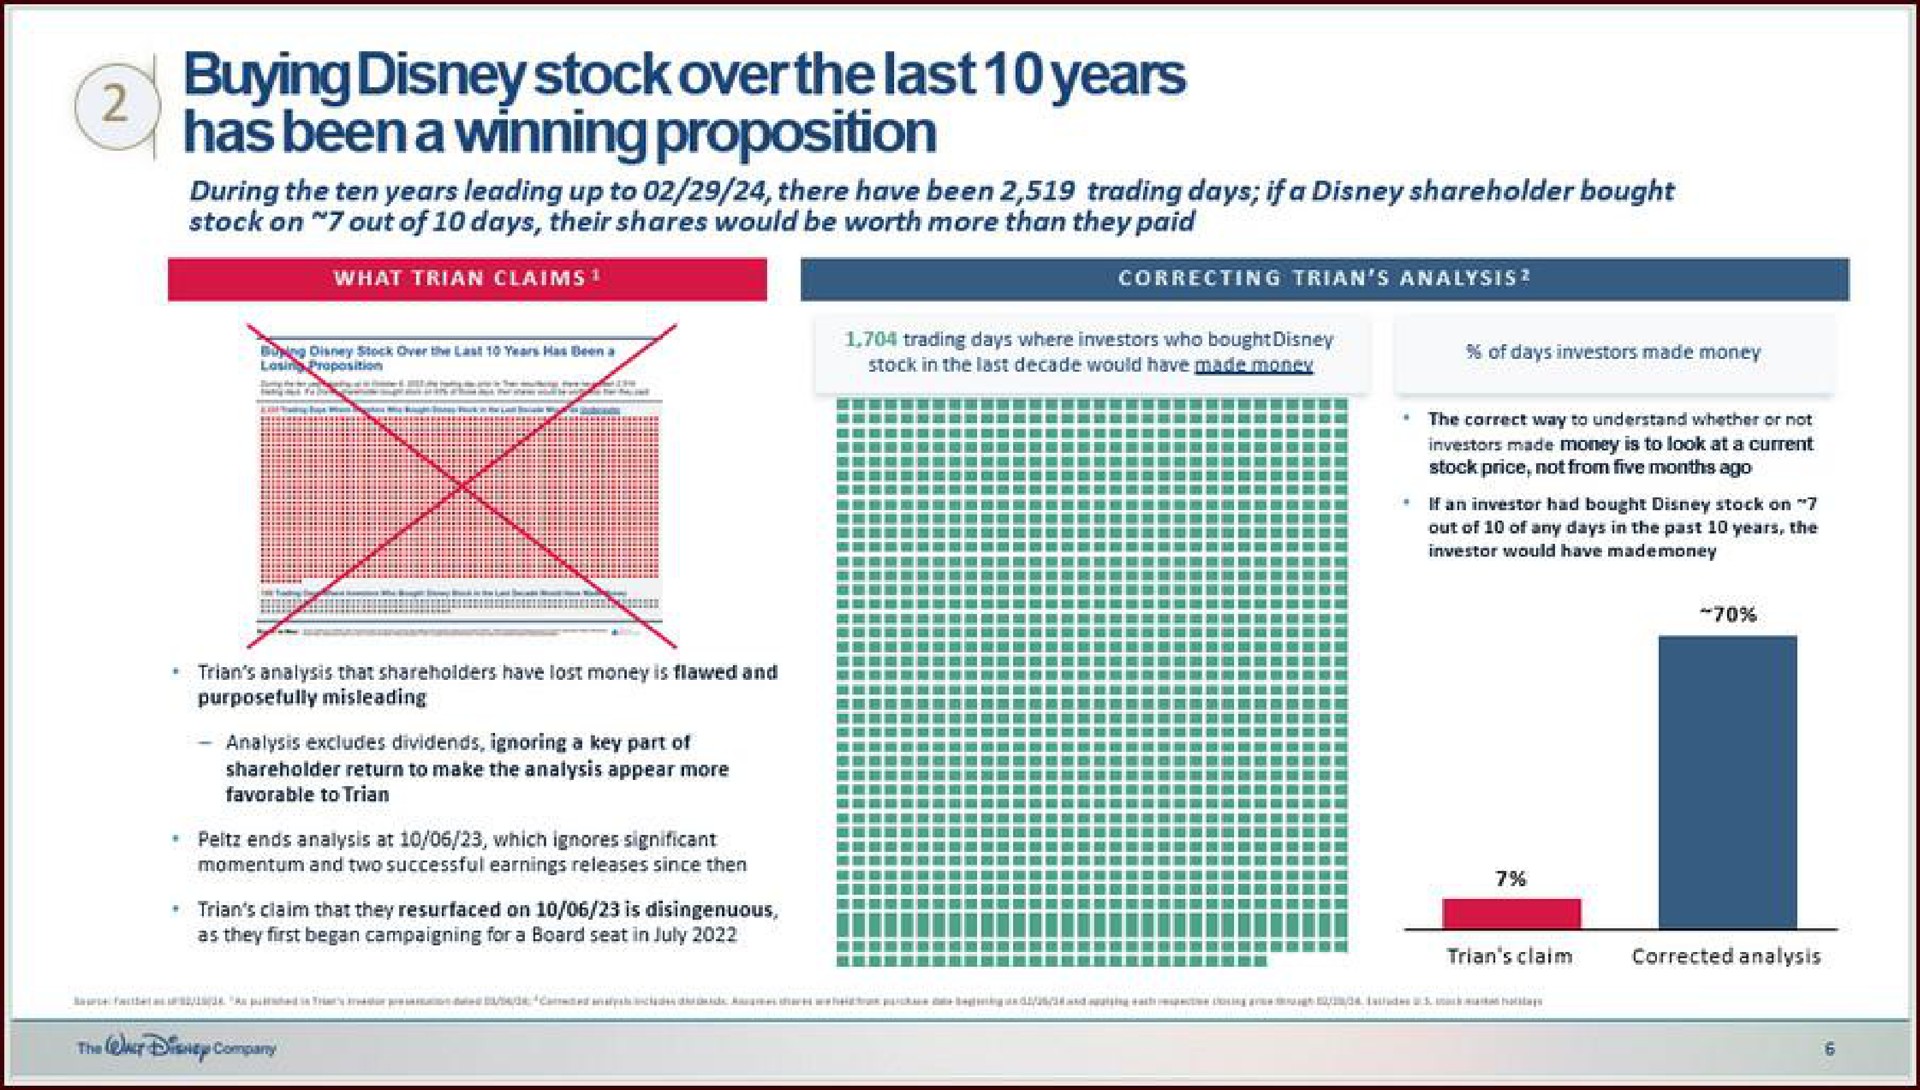 buying stock over the last years has winning proposition | Disney